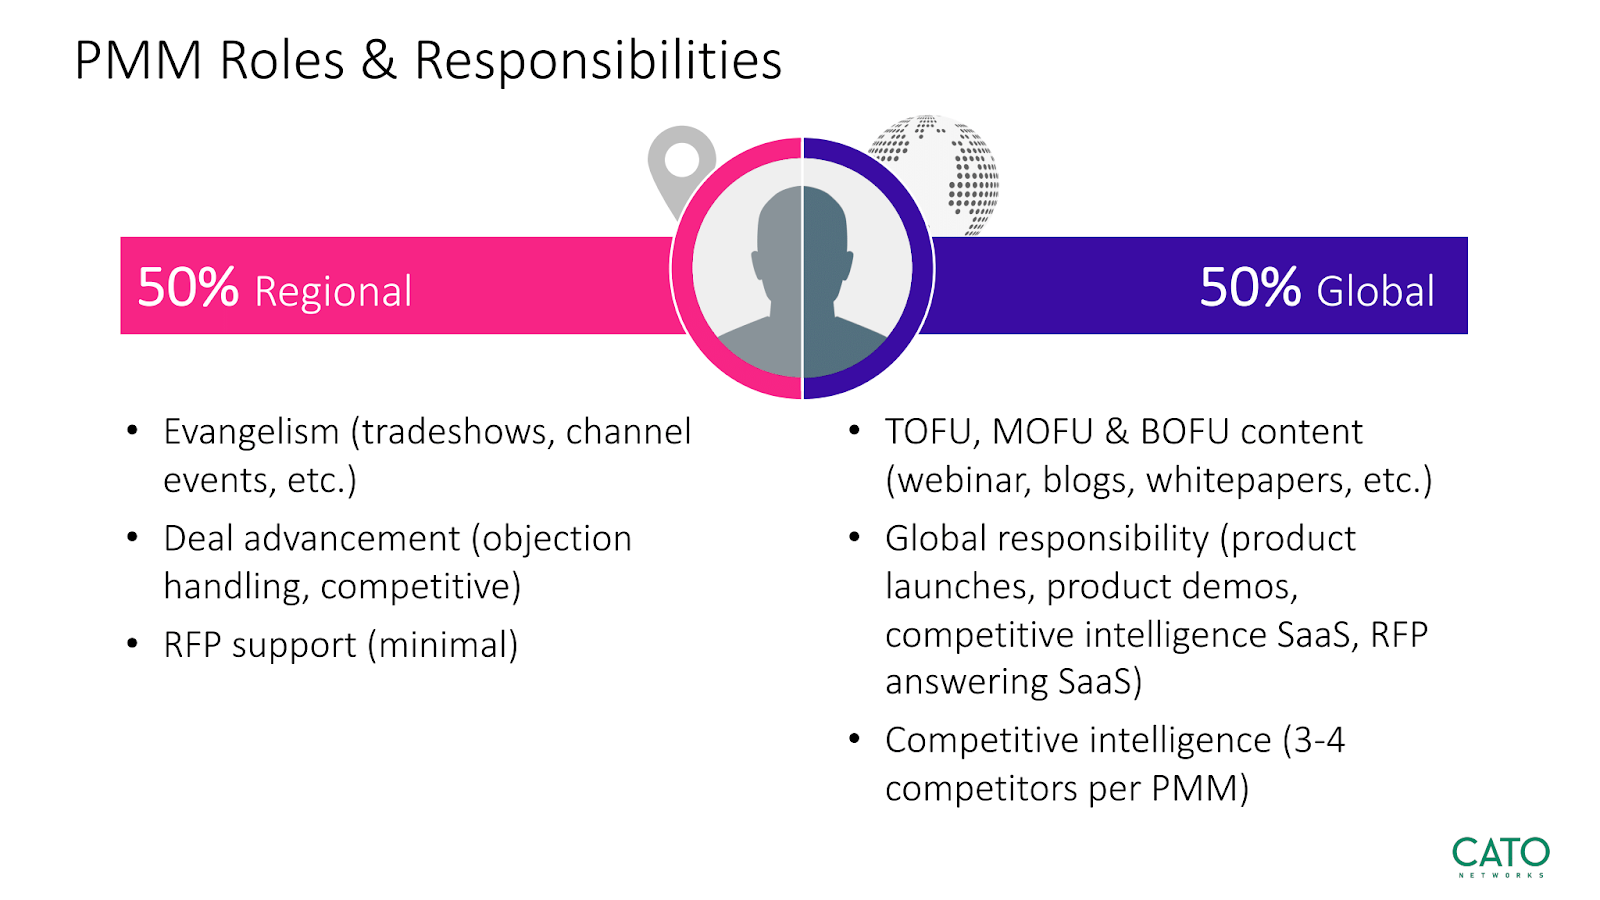 PMM roles and responsibilities